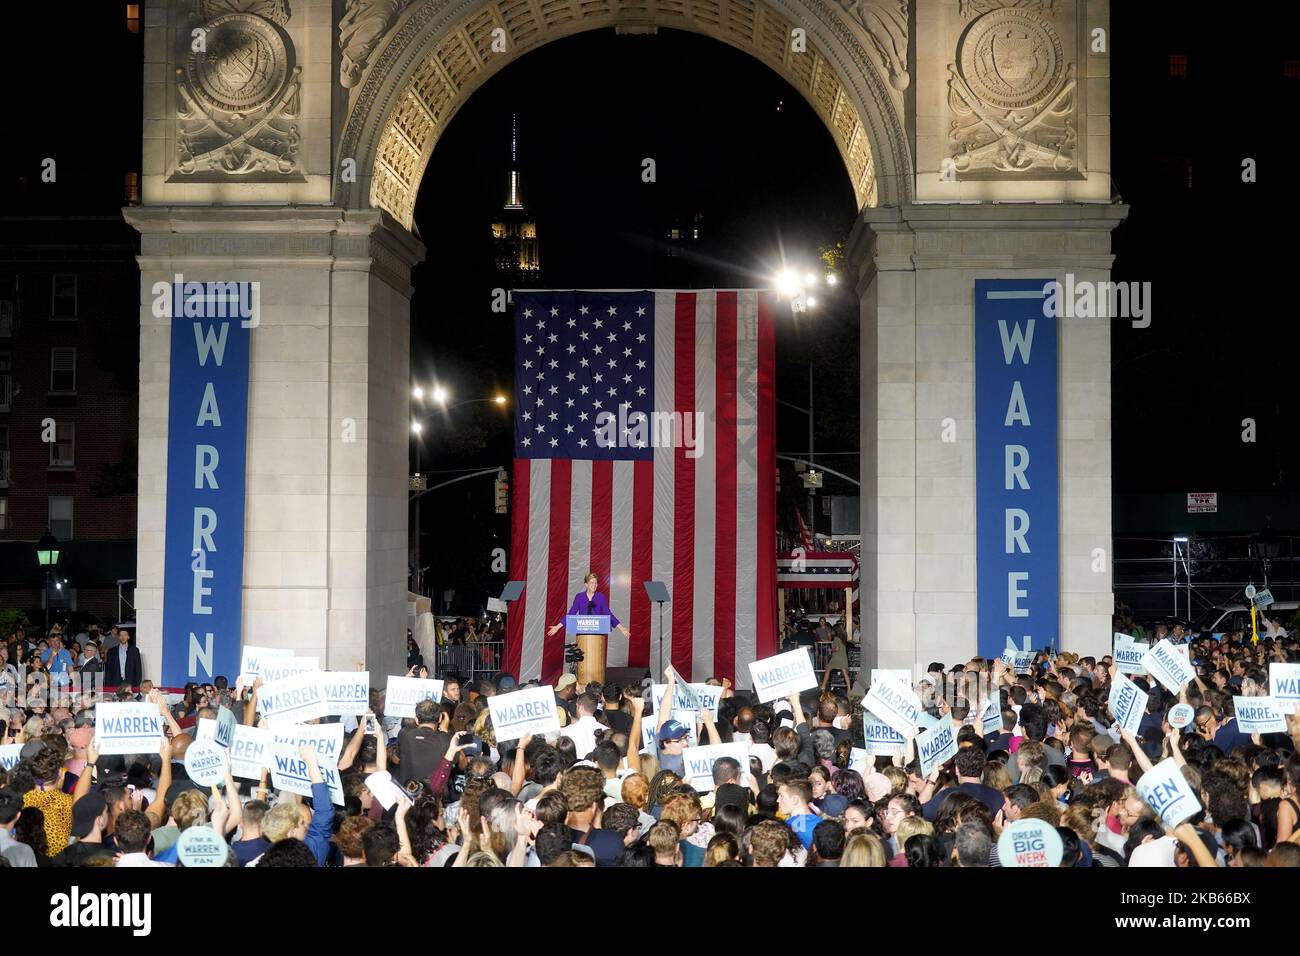 US Senator Elizabeth Warren delivered a major US Presidential campaign speech when she is addressing thousands of supporters on Monday night 16 September 2019 at Washington Square Park in Lower Manhattan, New York. (Photo by Selcuk Acar/NurPhoto) Stock Photo